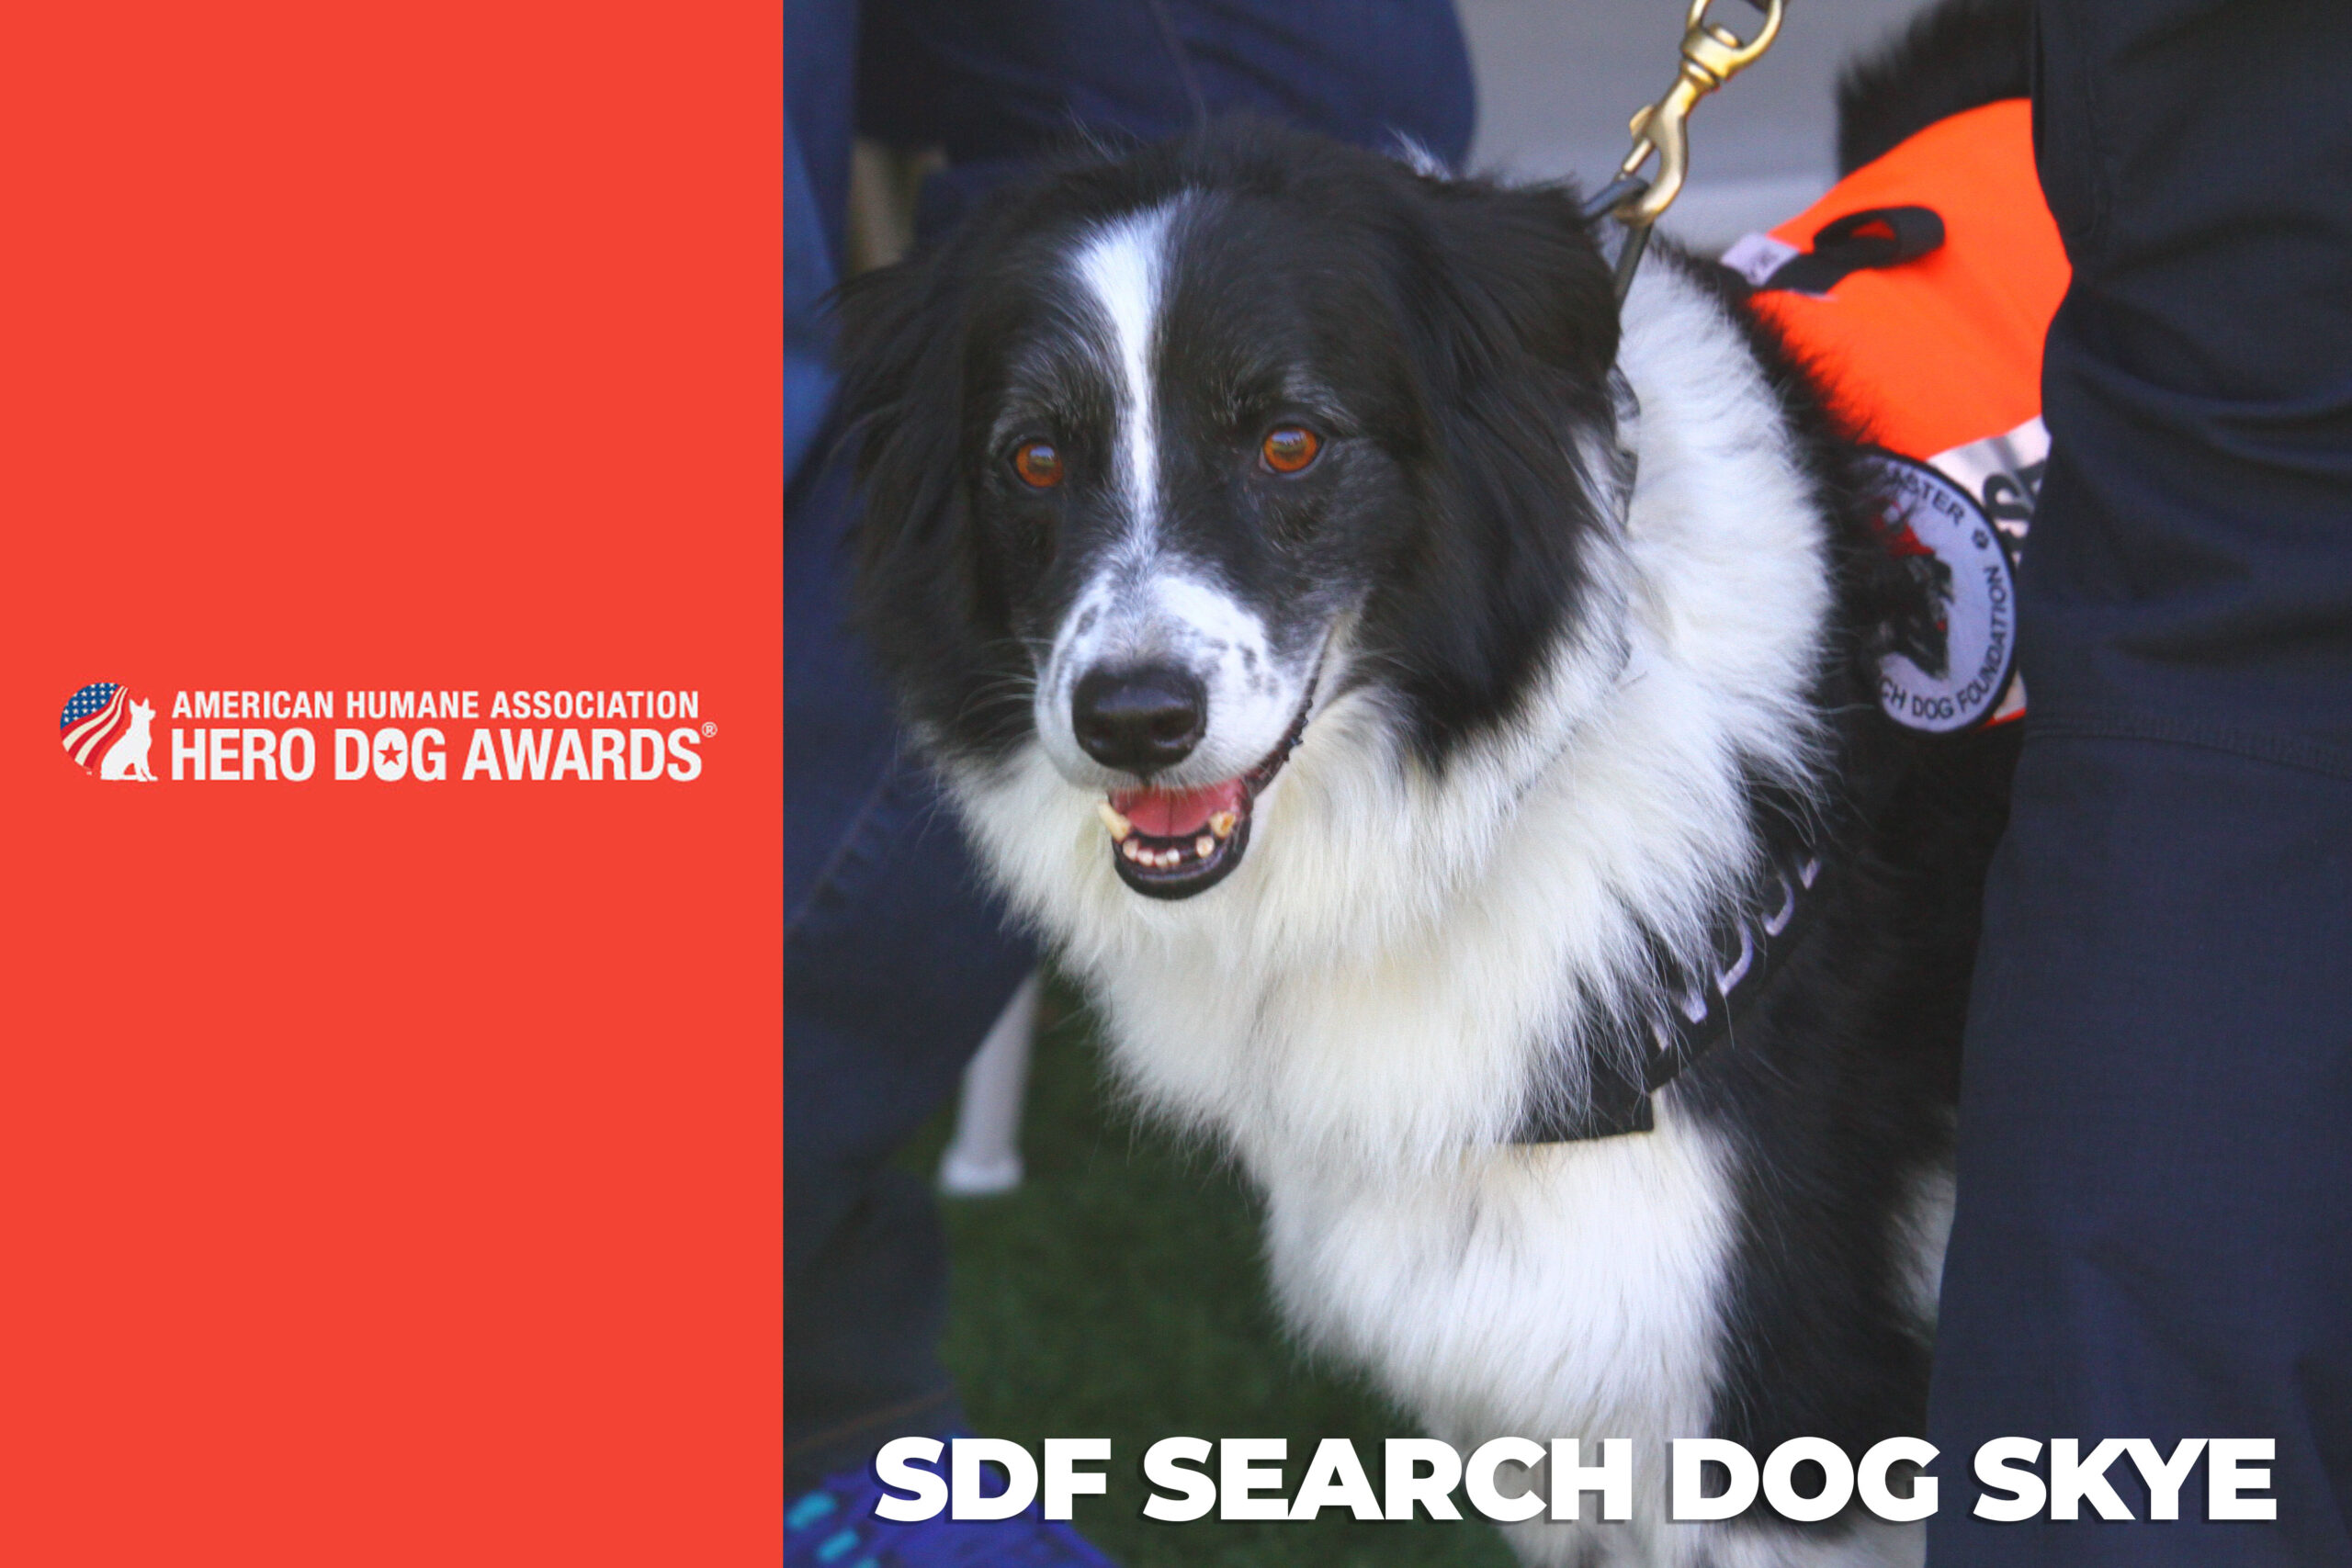 Search Dog Skye is a finalist in American Humane Hero Dog Awards in the Search and Rescue category